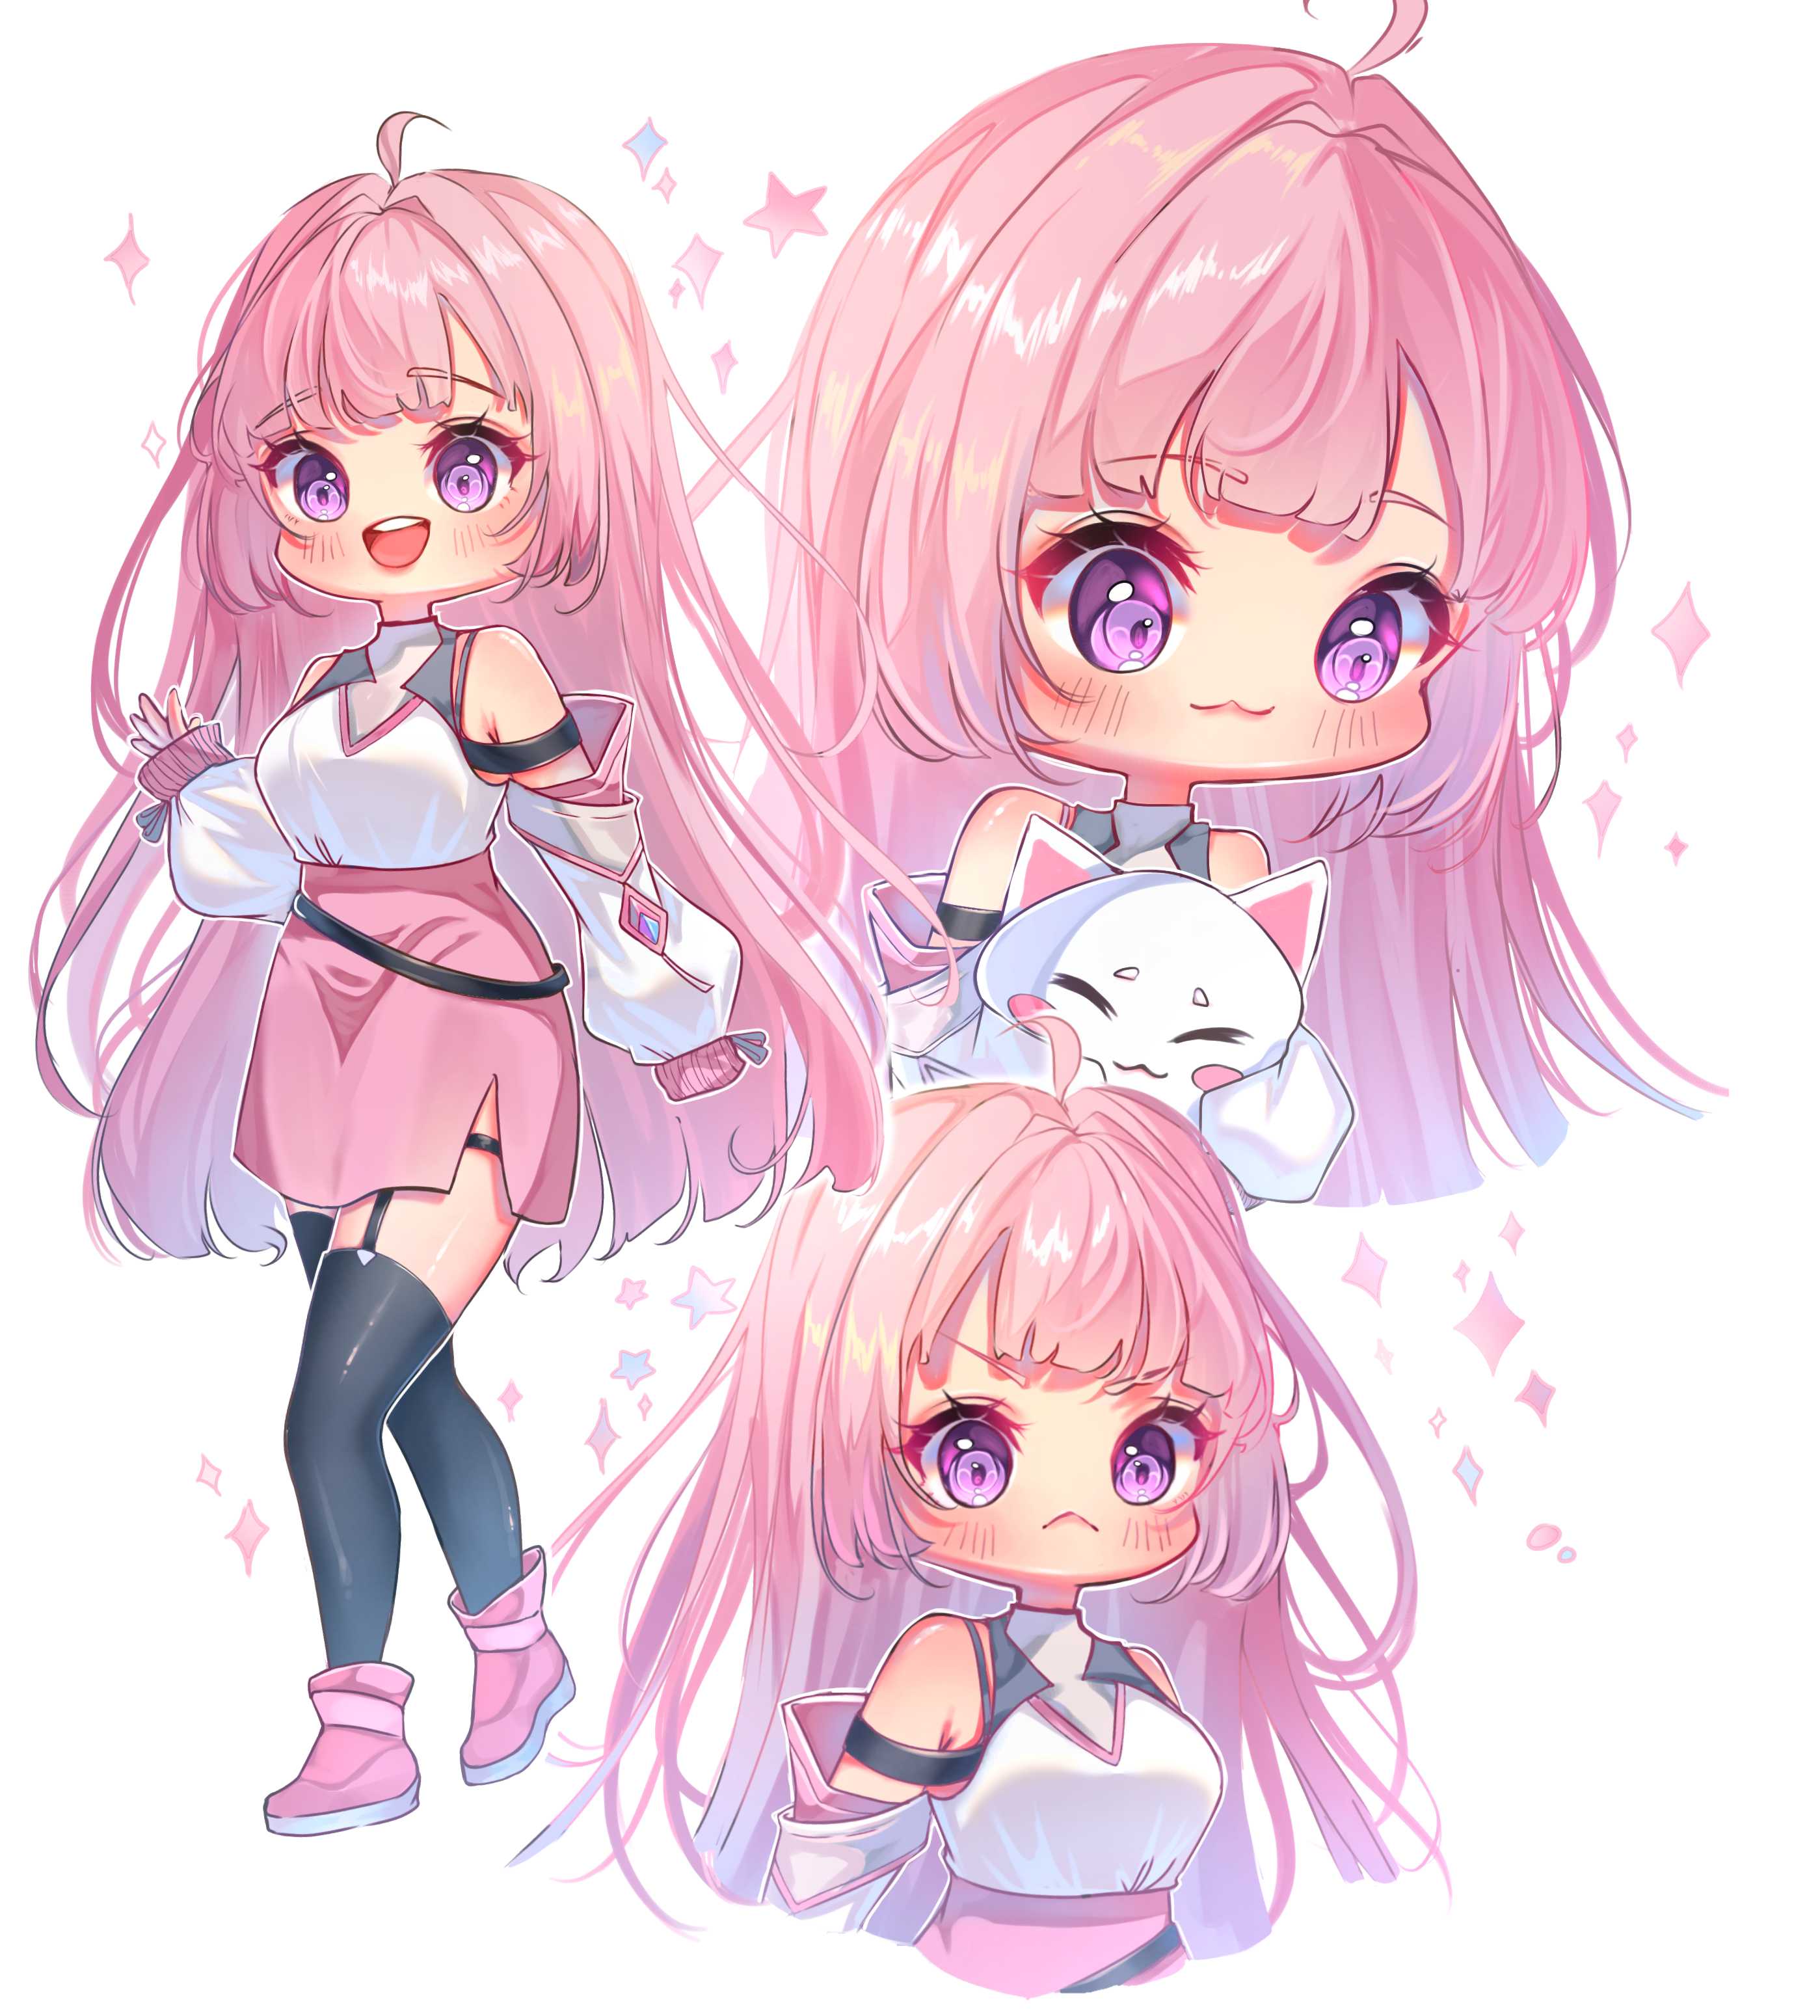 Draw you a cute chibi anime character for you by Luthfiahyn8